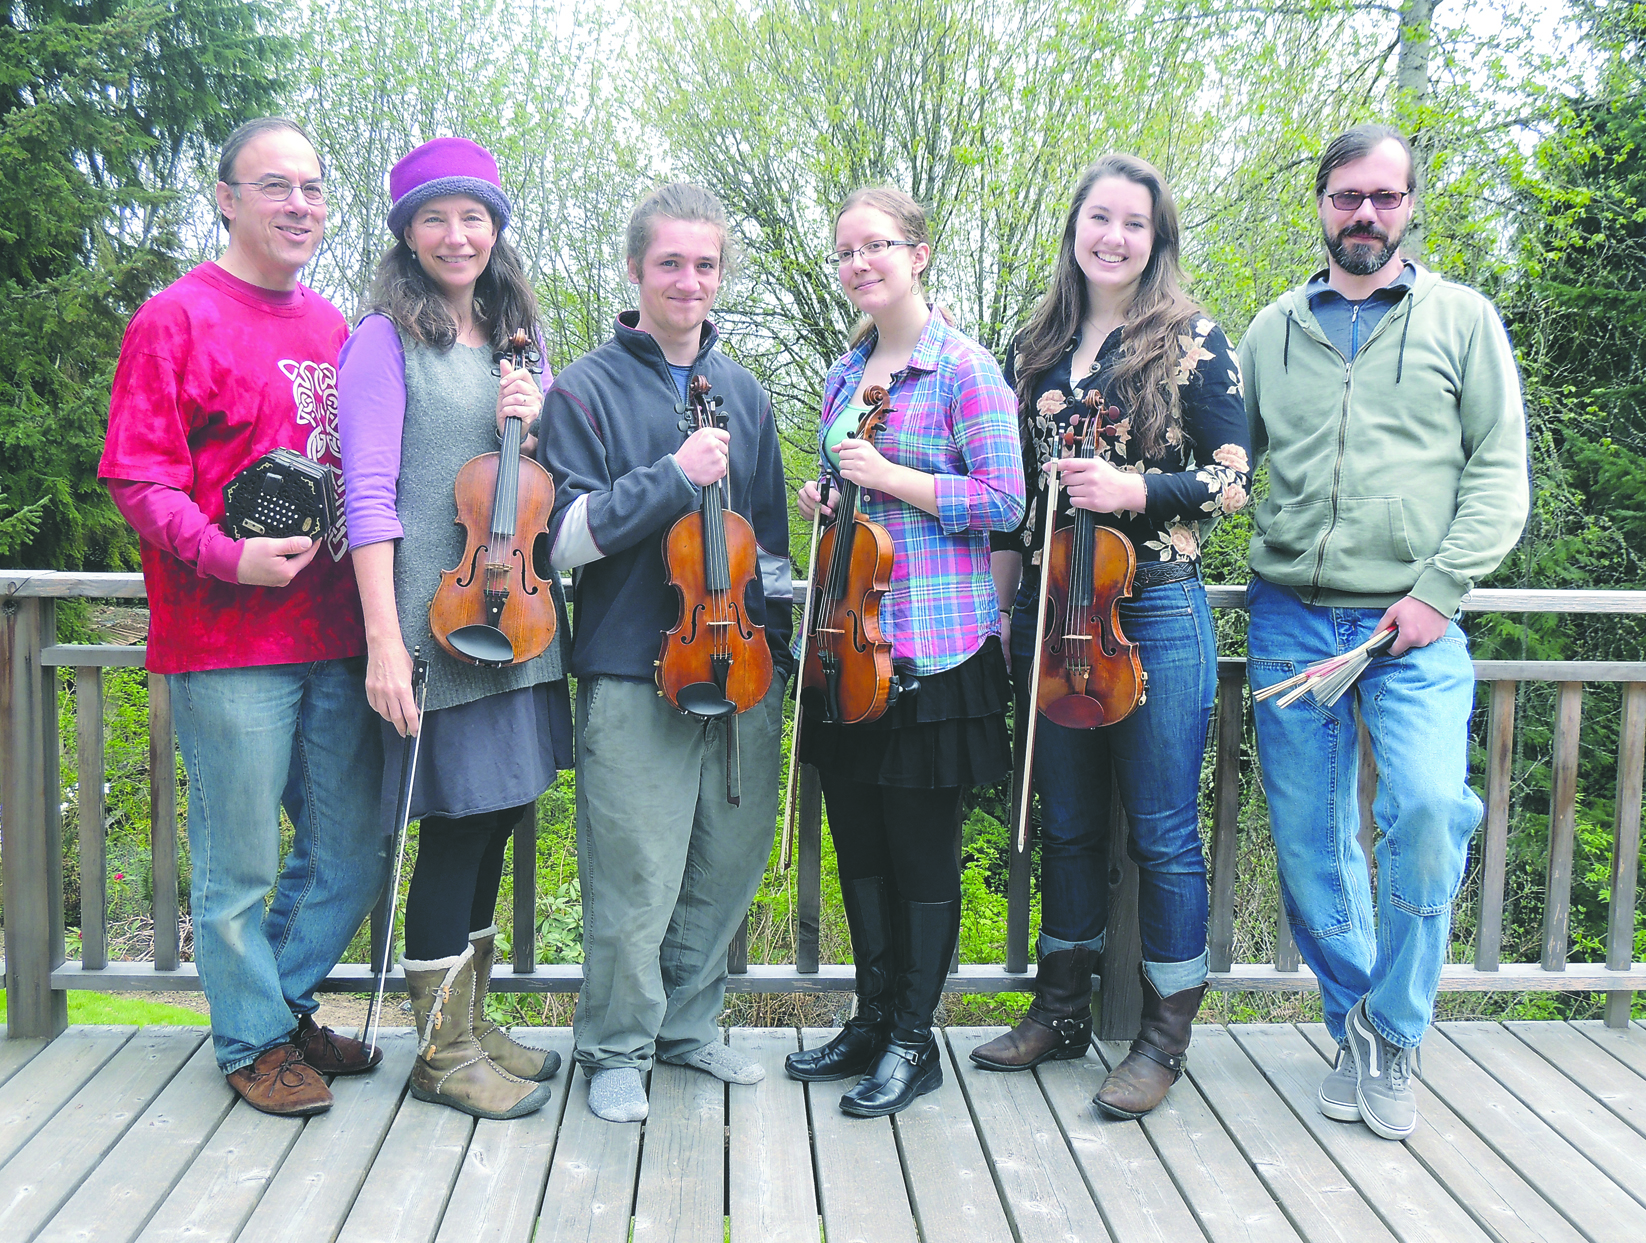 The Black Diamond Fiddle Club — from left